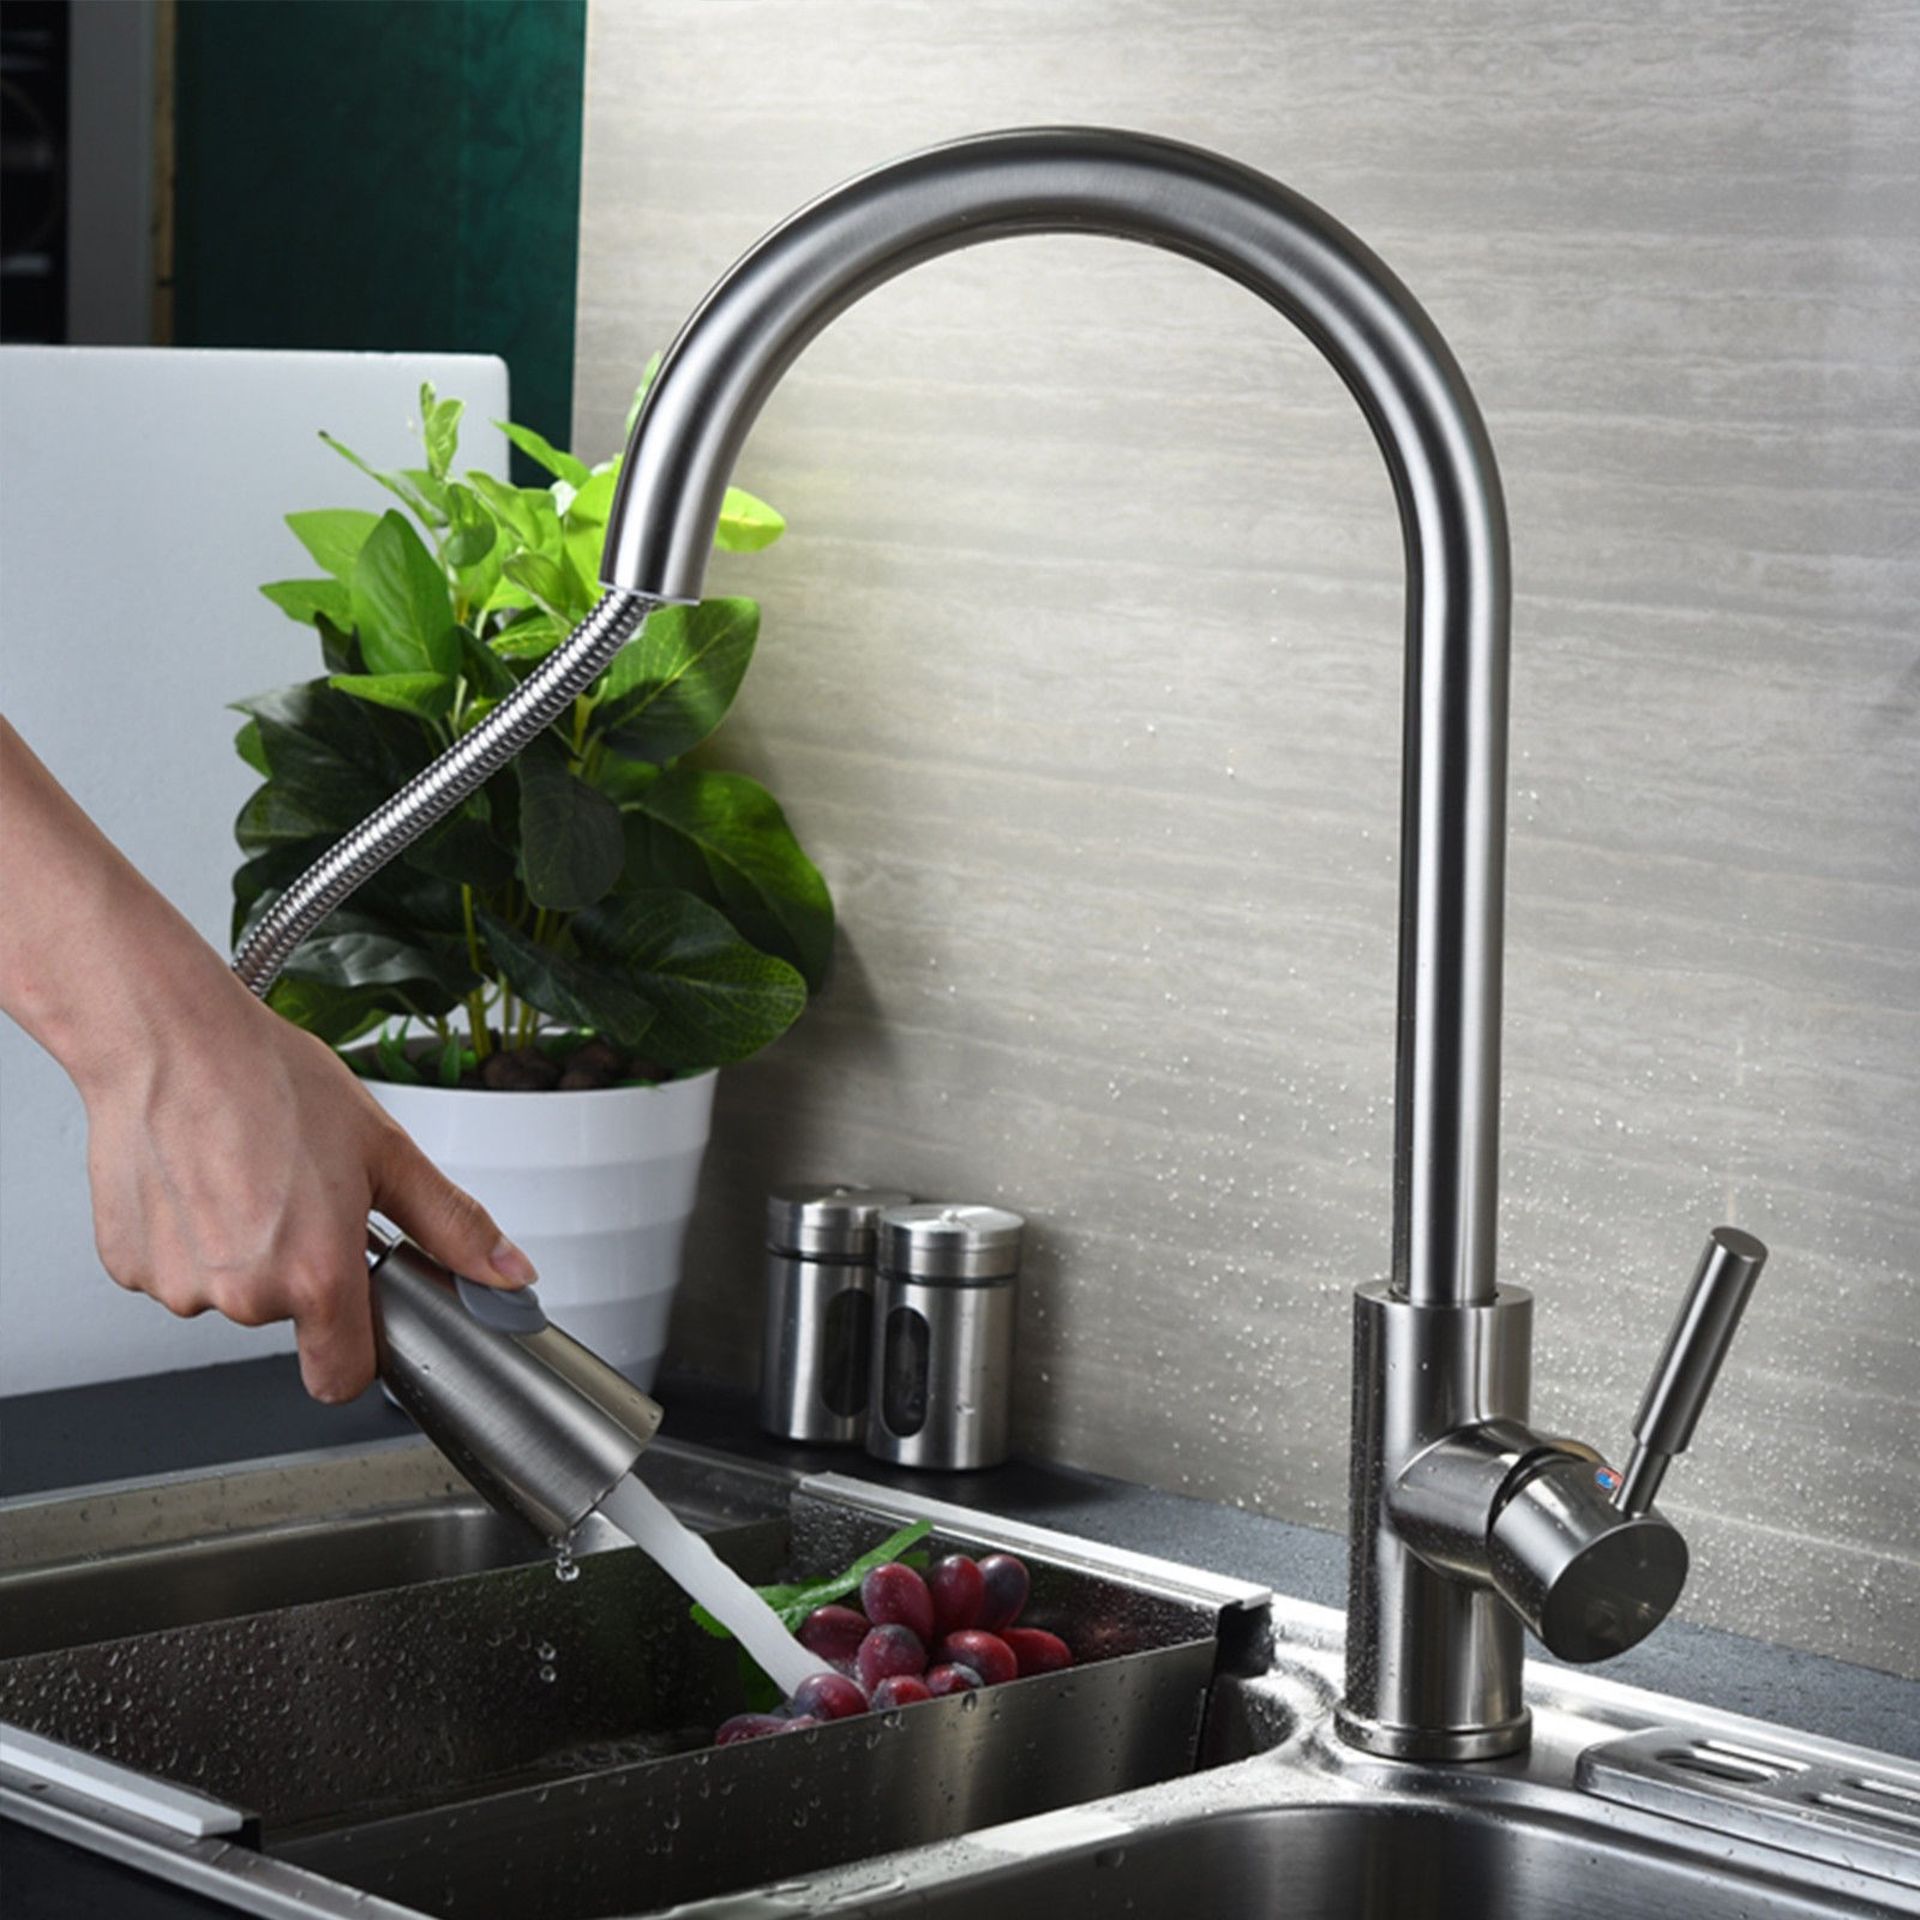 (OS252) Della Modern Monobloc Chrome Brass Pull Out Spray Mixer Tap. RRP £299.99. This tap is from